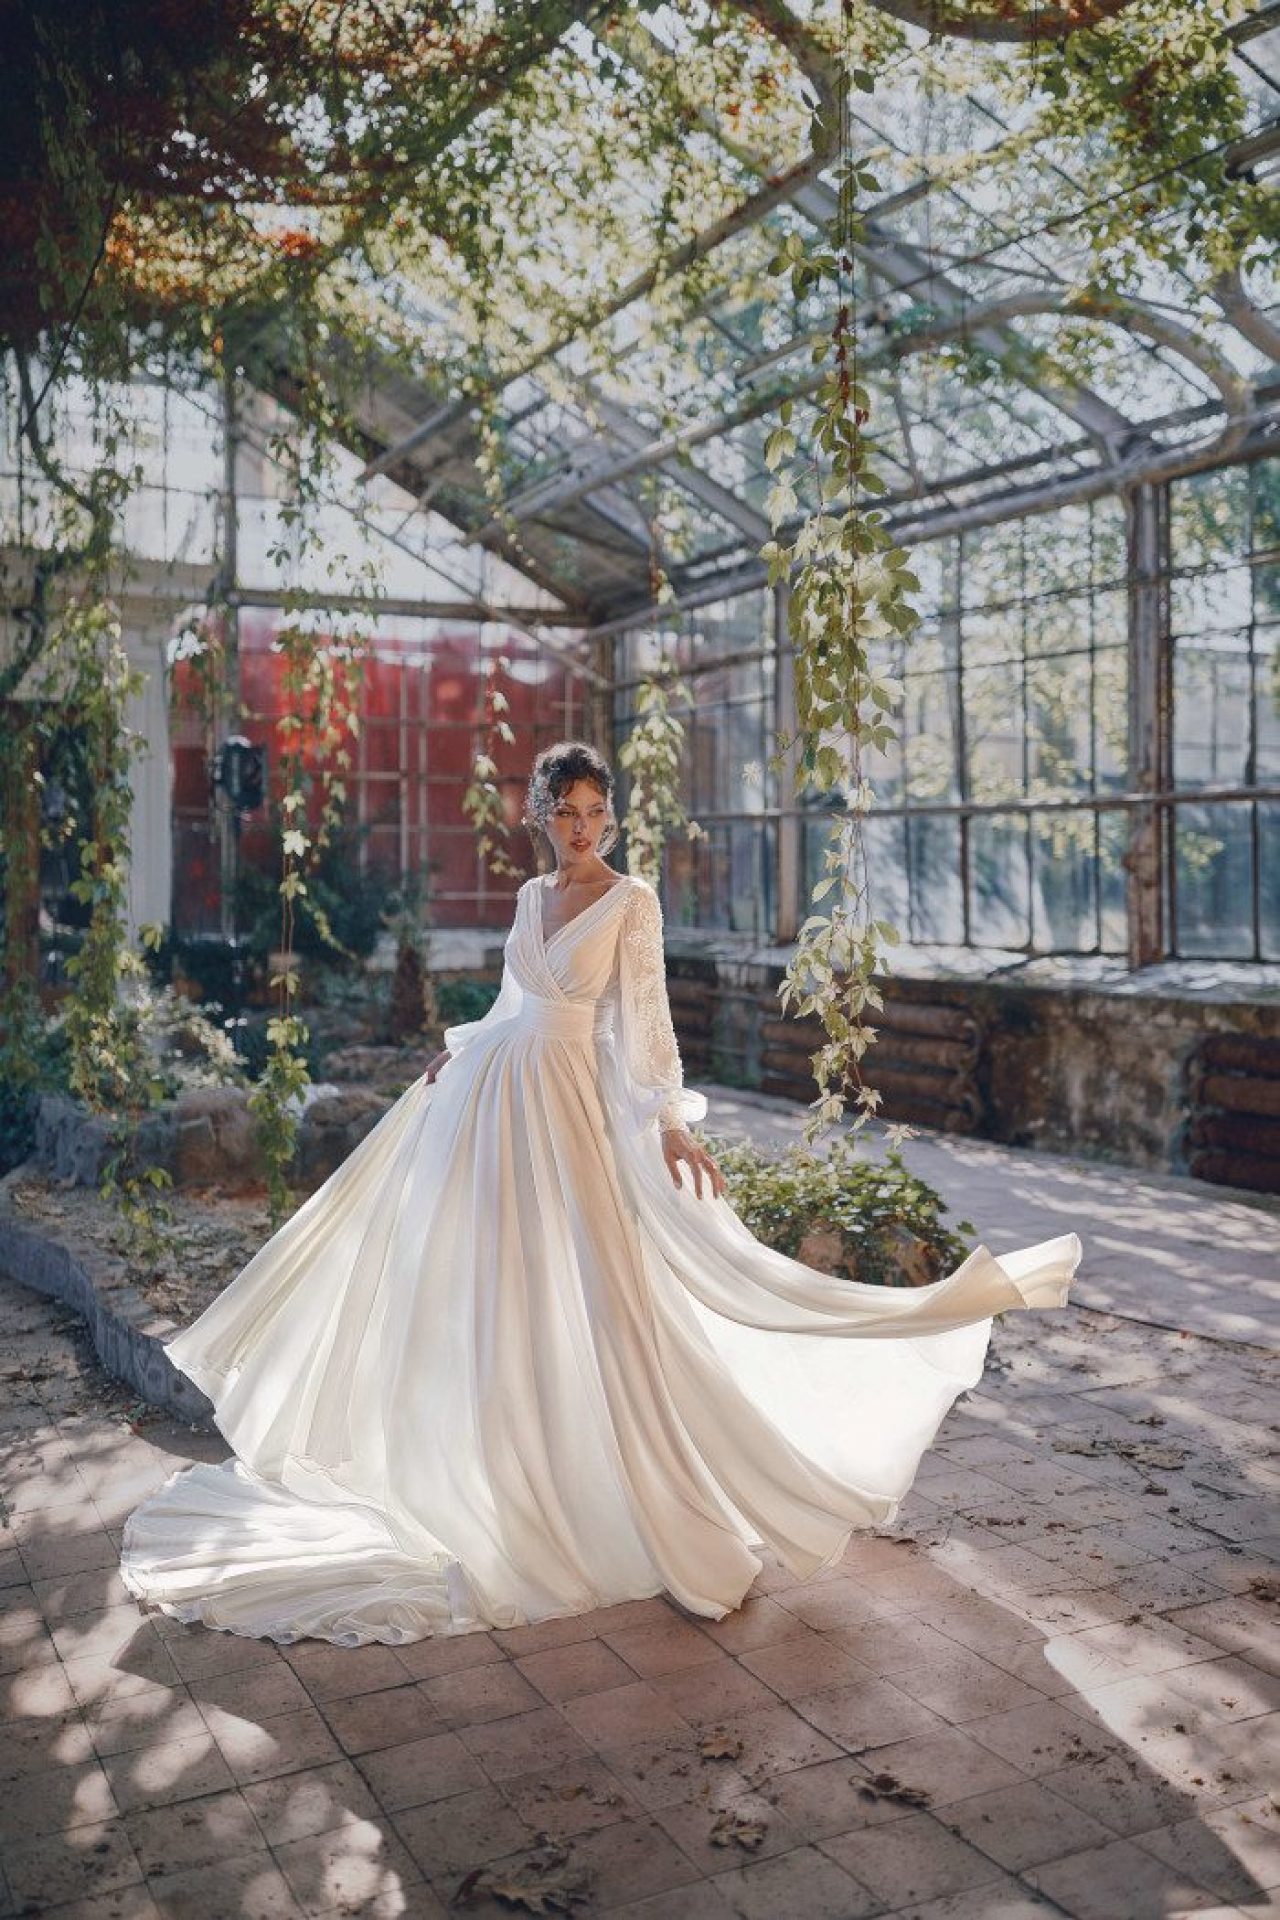 chiffon a-line wedding dress Poletta with long beaded sleeves, bow on the waist, low back and two slits on sale by rara avis 1